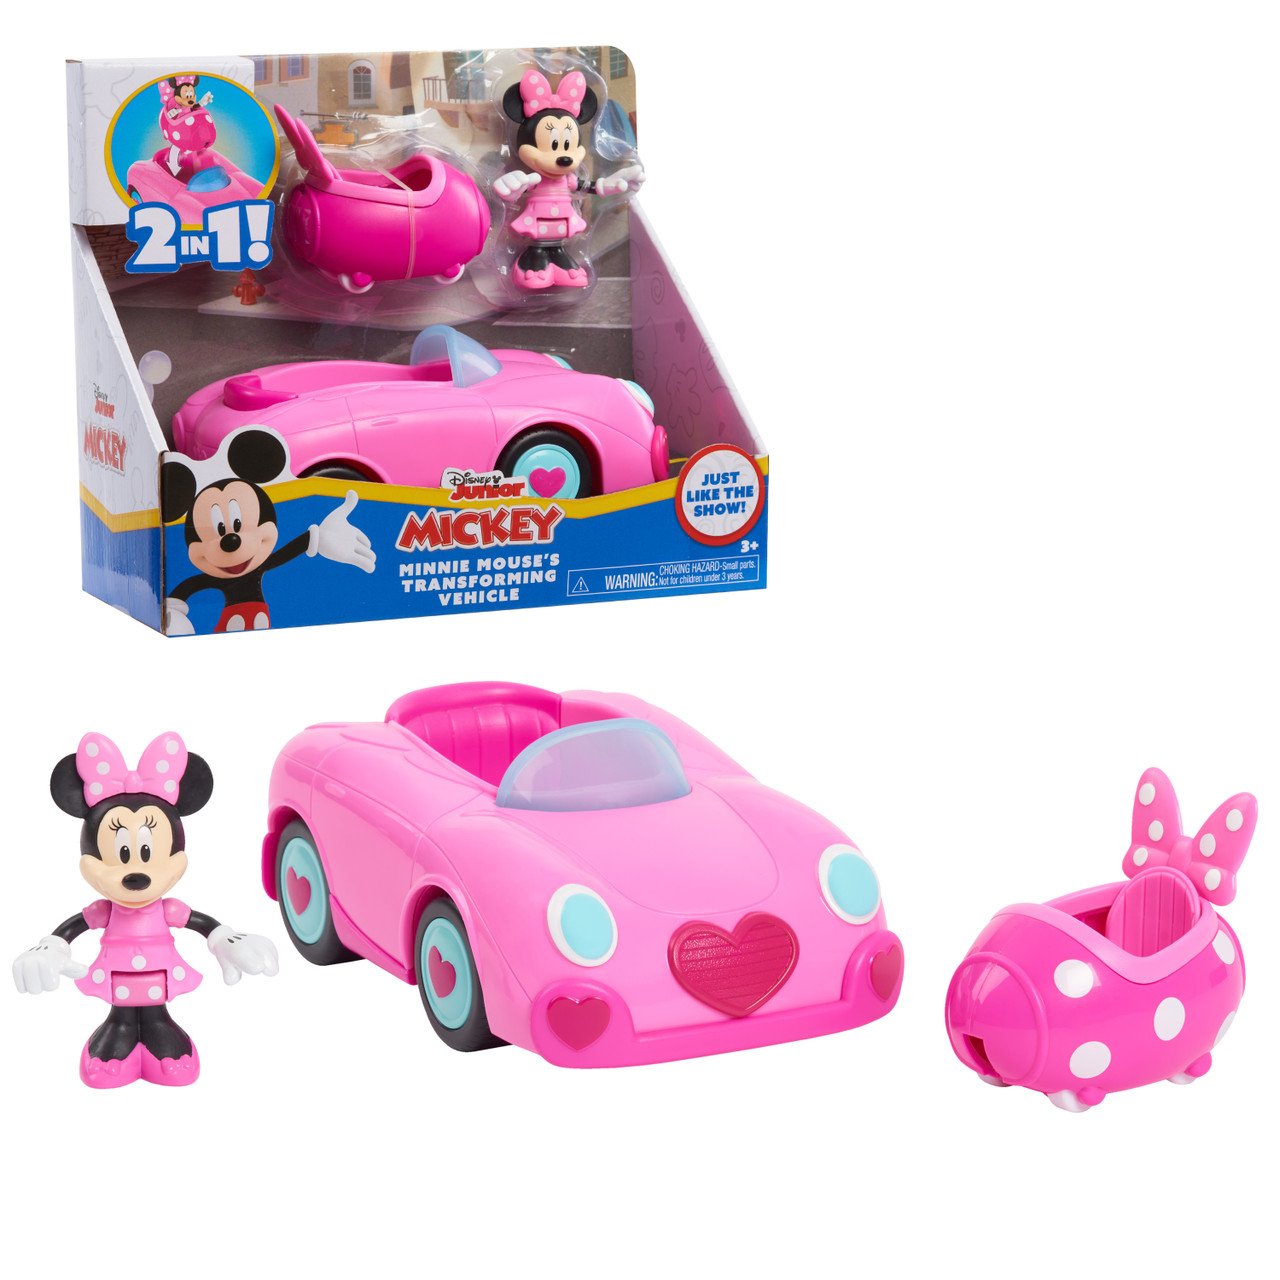 DISNEY JR MICKEY MOUSE TRANSFORMING VEHICLE - MINNIE MOUSE